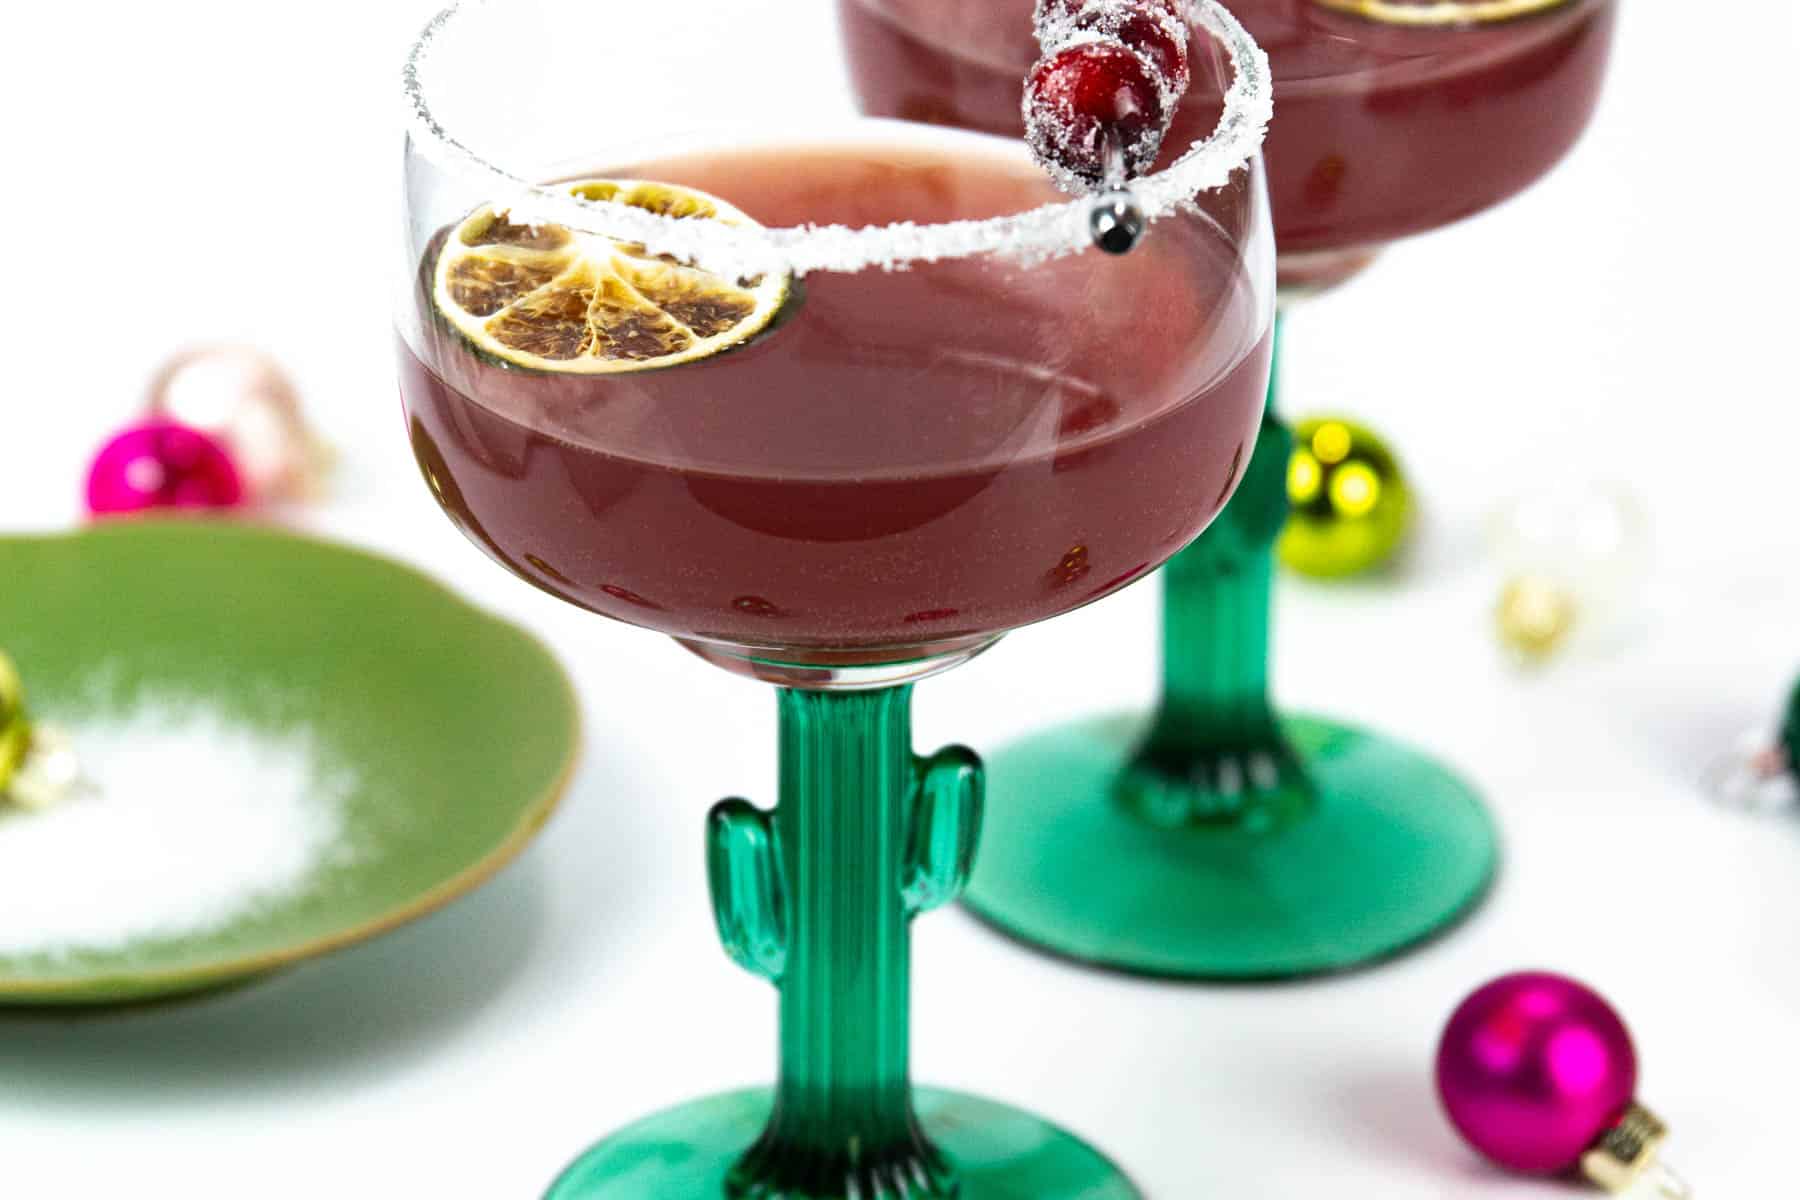 Two cranberry margaritas next to Christmas ornaments and a plate of salt.